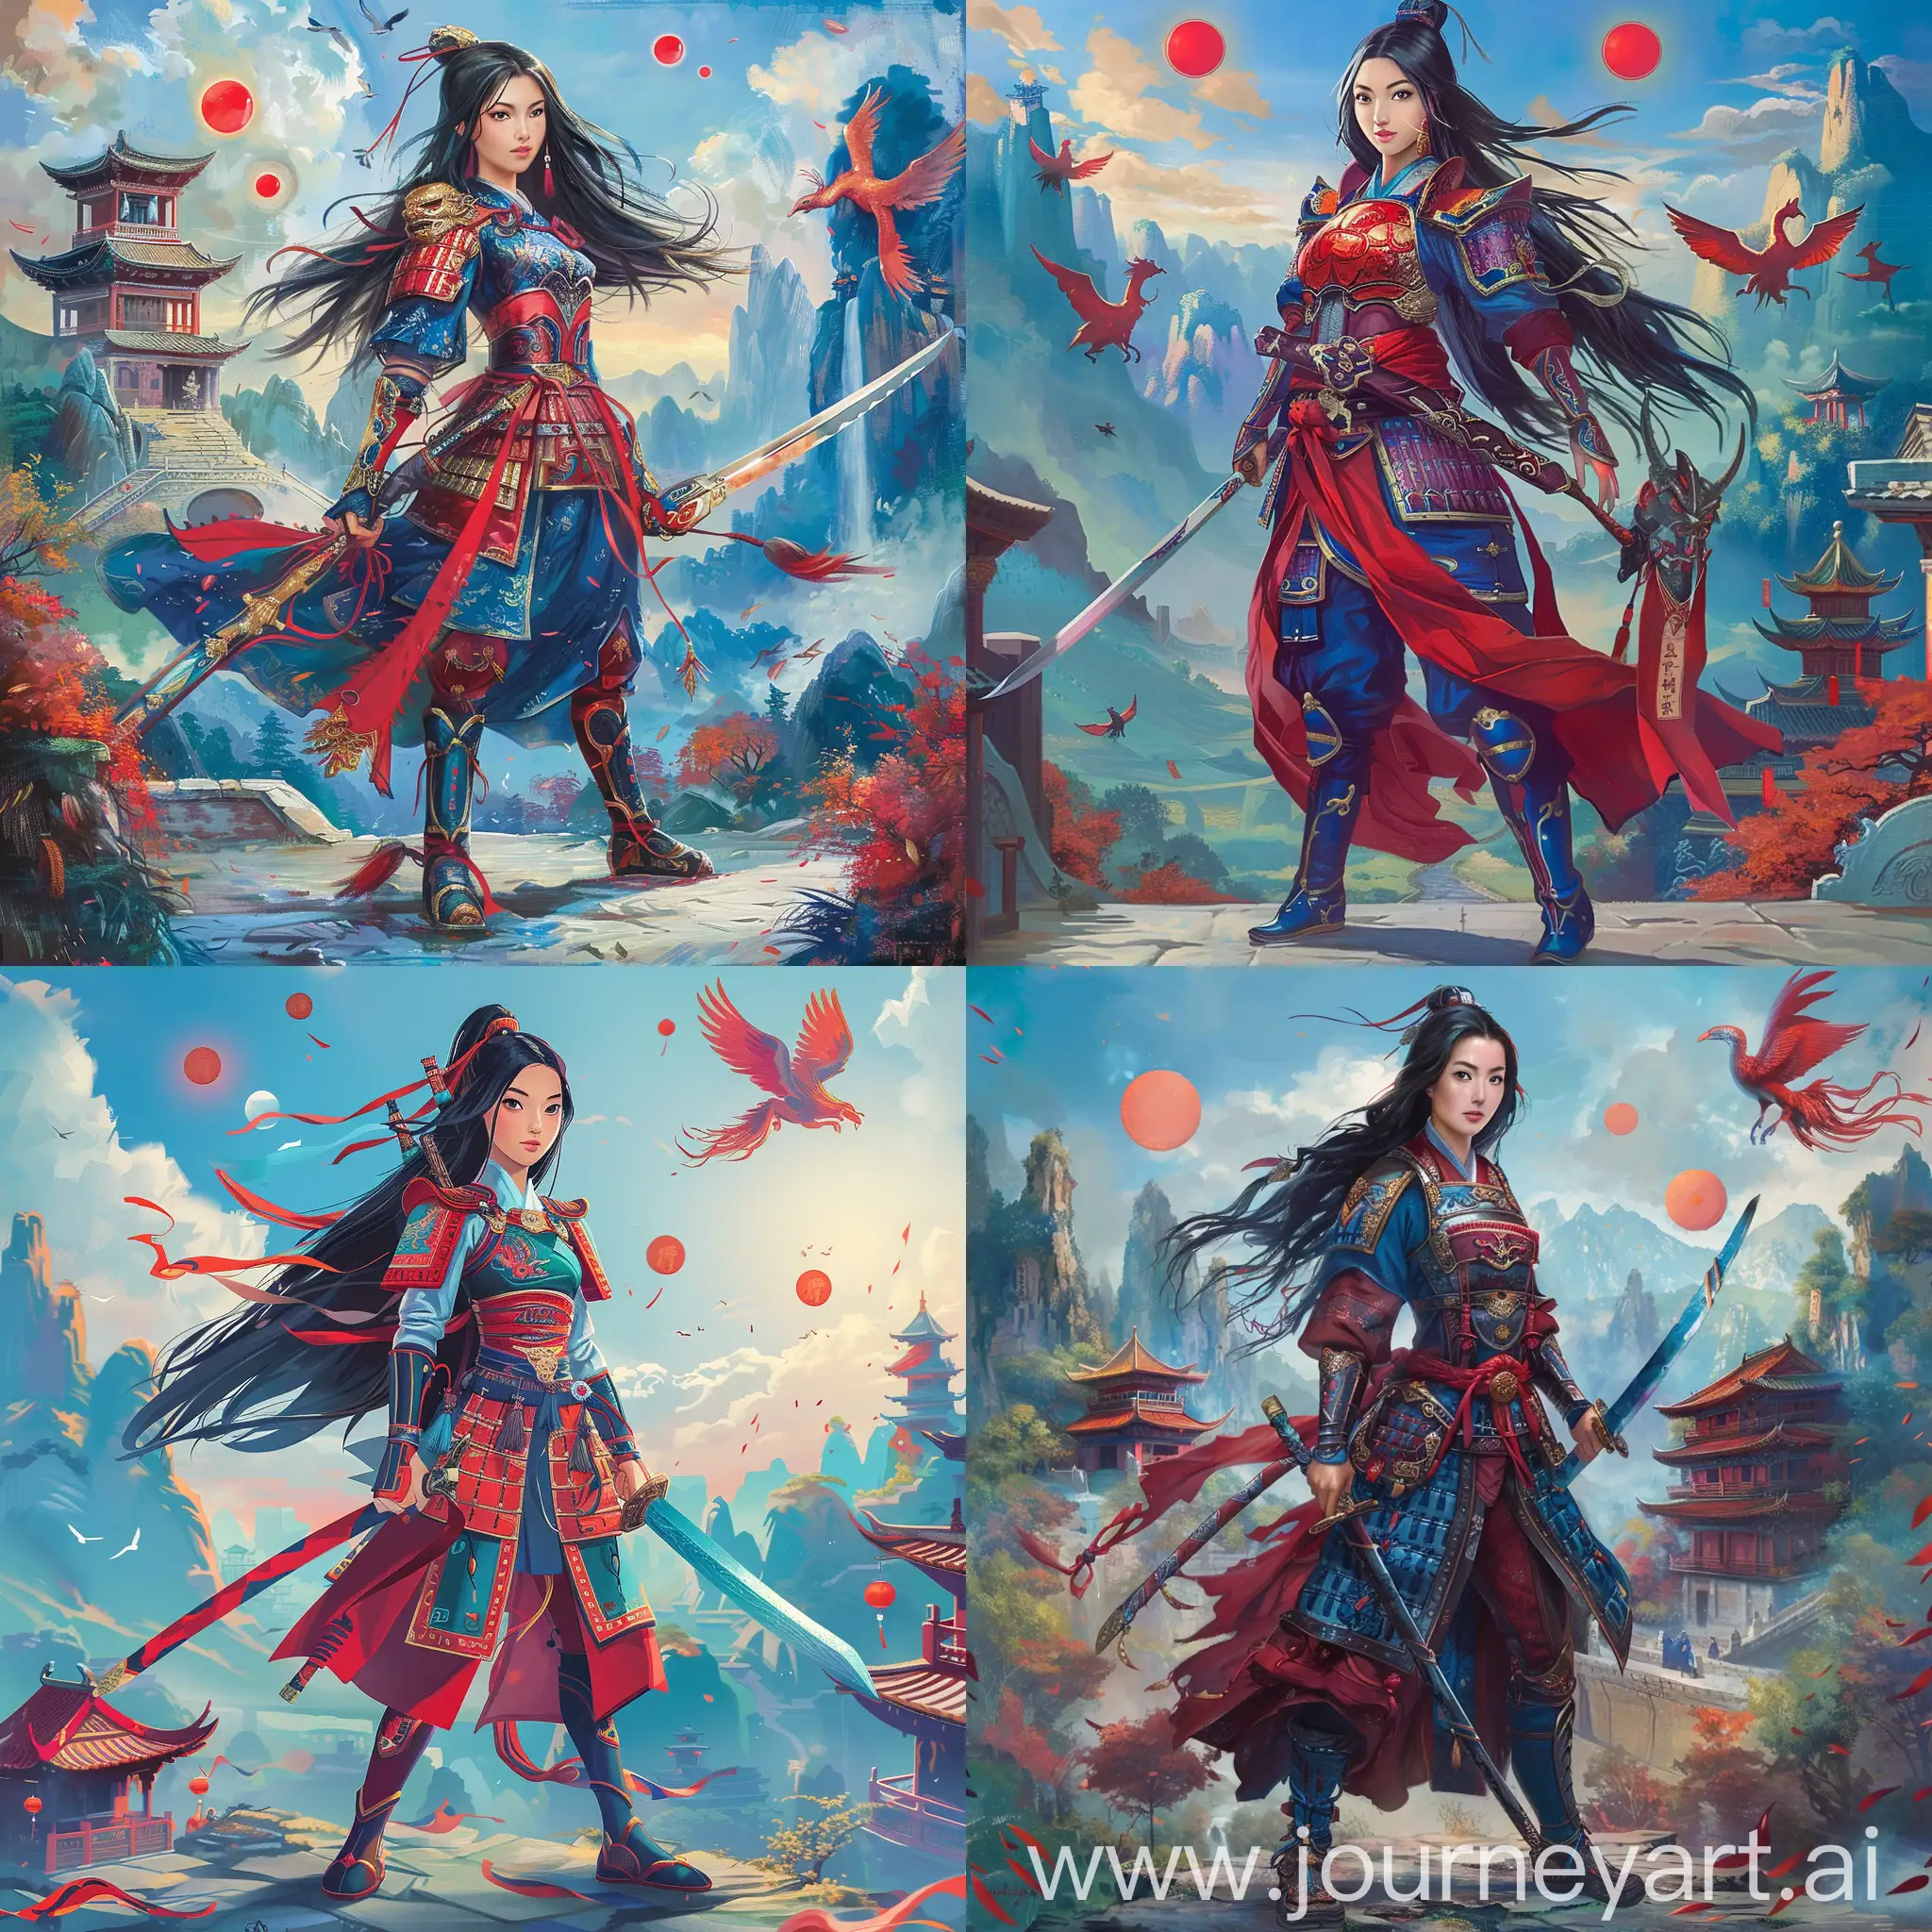 Disney-Chinese-Princess-Mulan-in-Traditional-Armor-with-Sword-against-Guilin-Mountain-Temple-Background